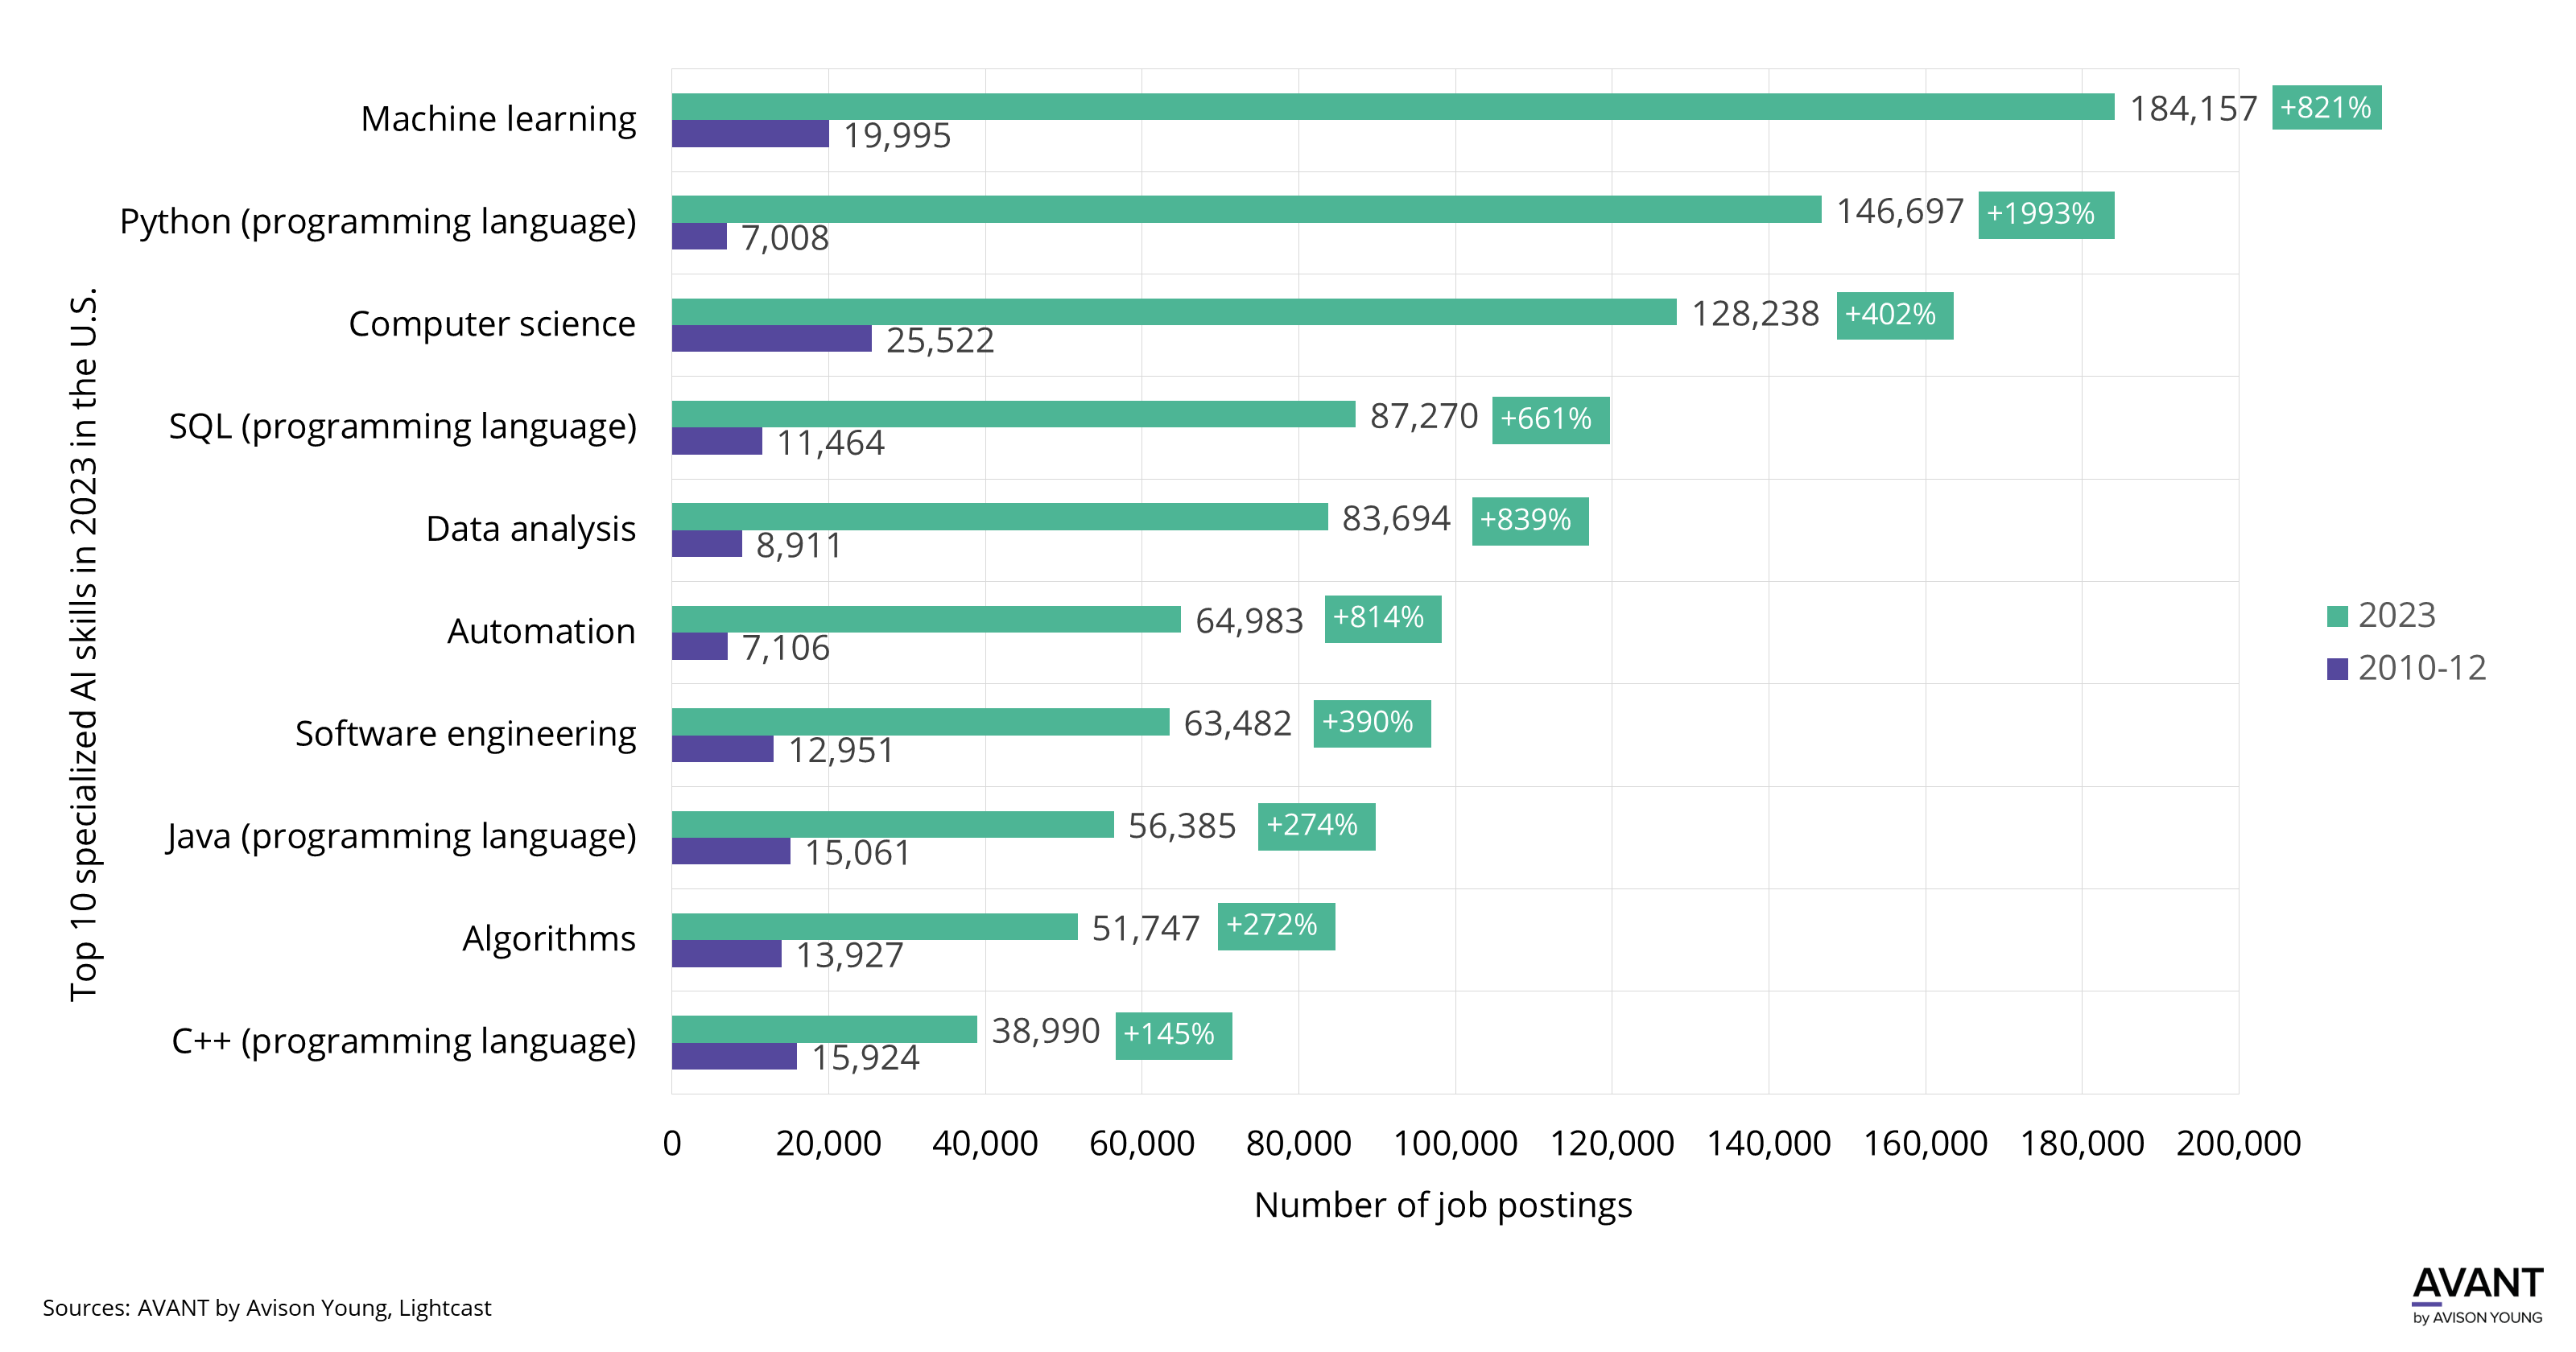 graph of number of job postings in the top 10 specialized AI skills in 2023 in the U.S. compared to 2010 to 2012